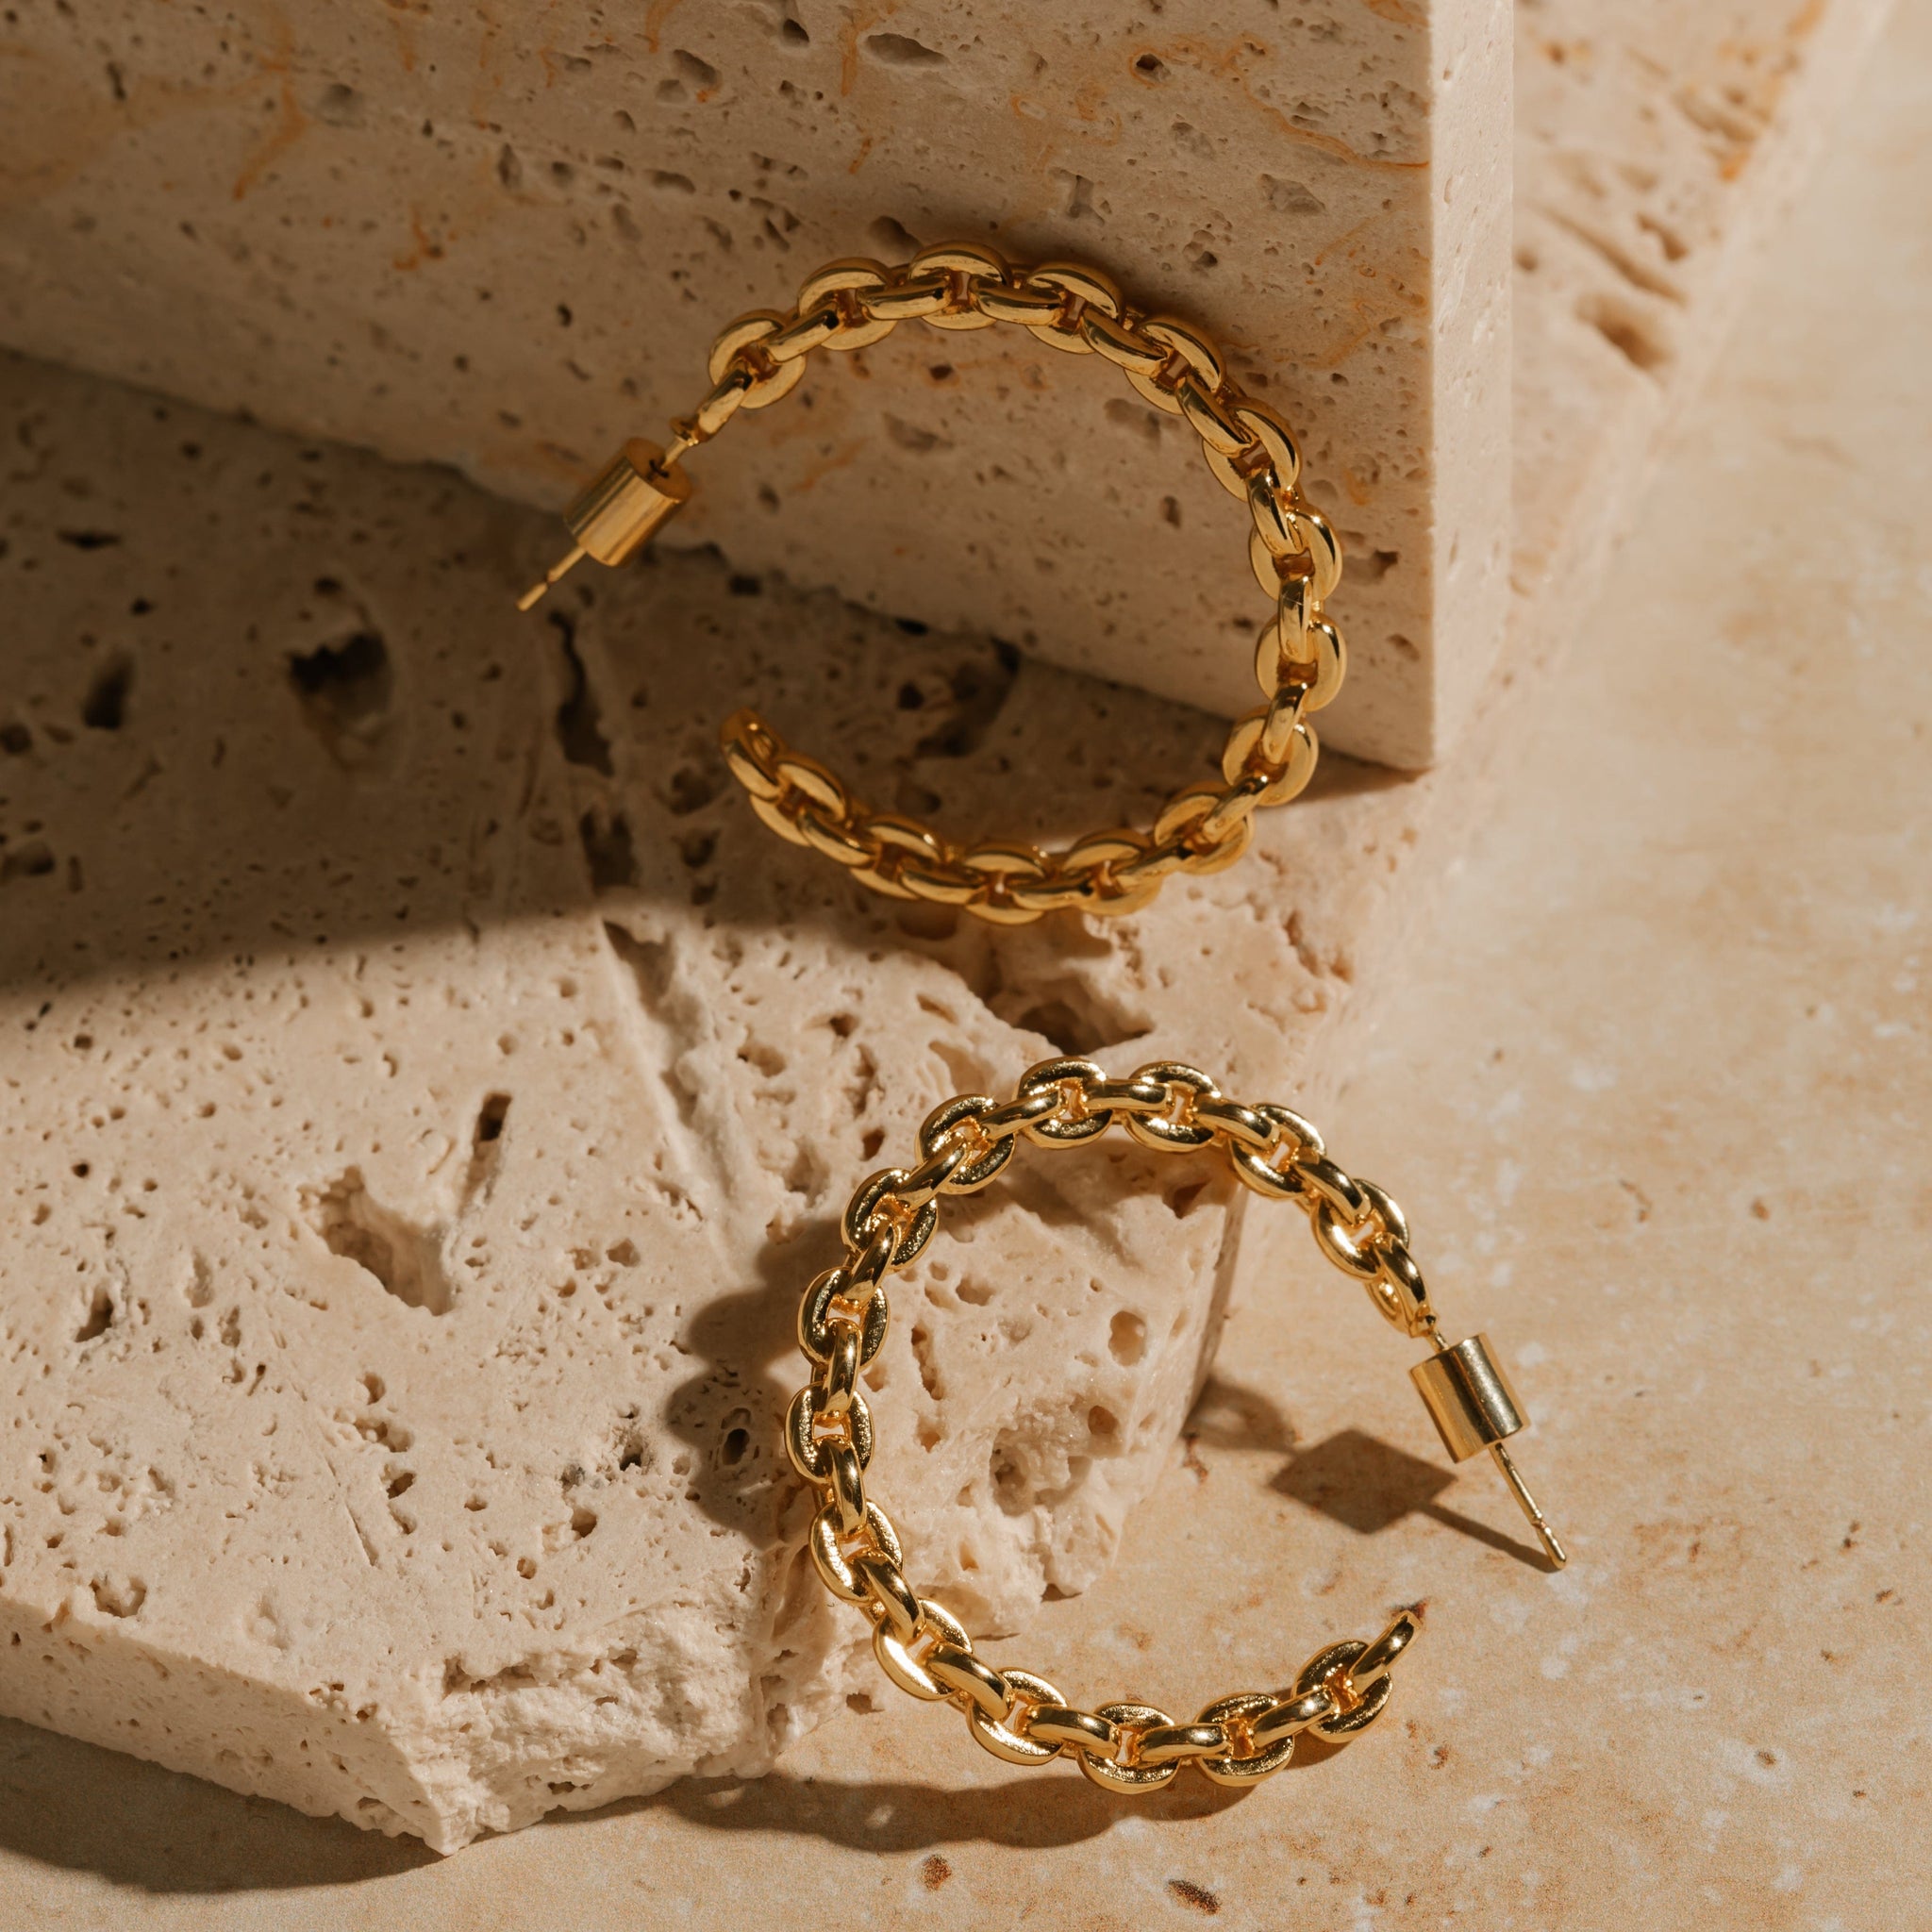 A pair of Catena Hoop earrings sits on a tiered stone slab, one earring propped up and glistening in the light while the other sits in the shadow of a raised block. 